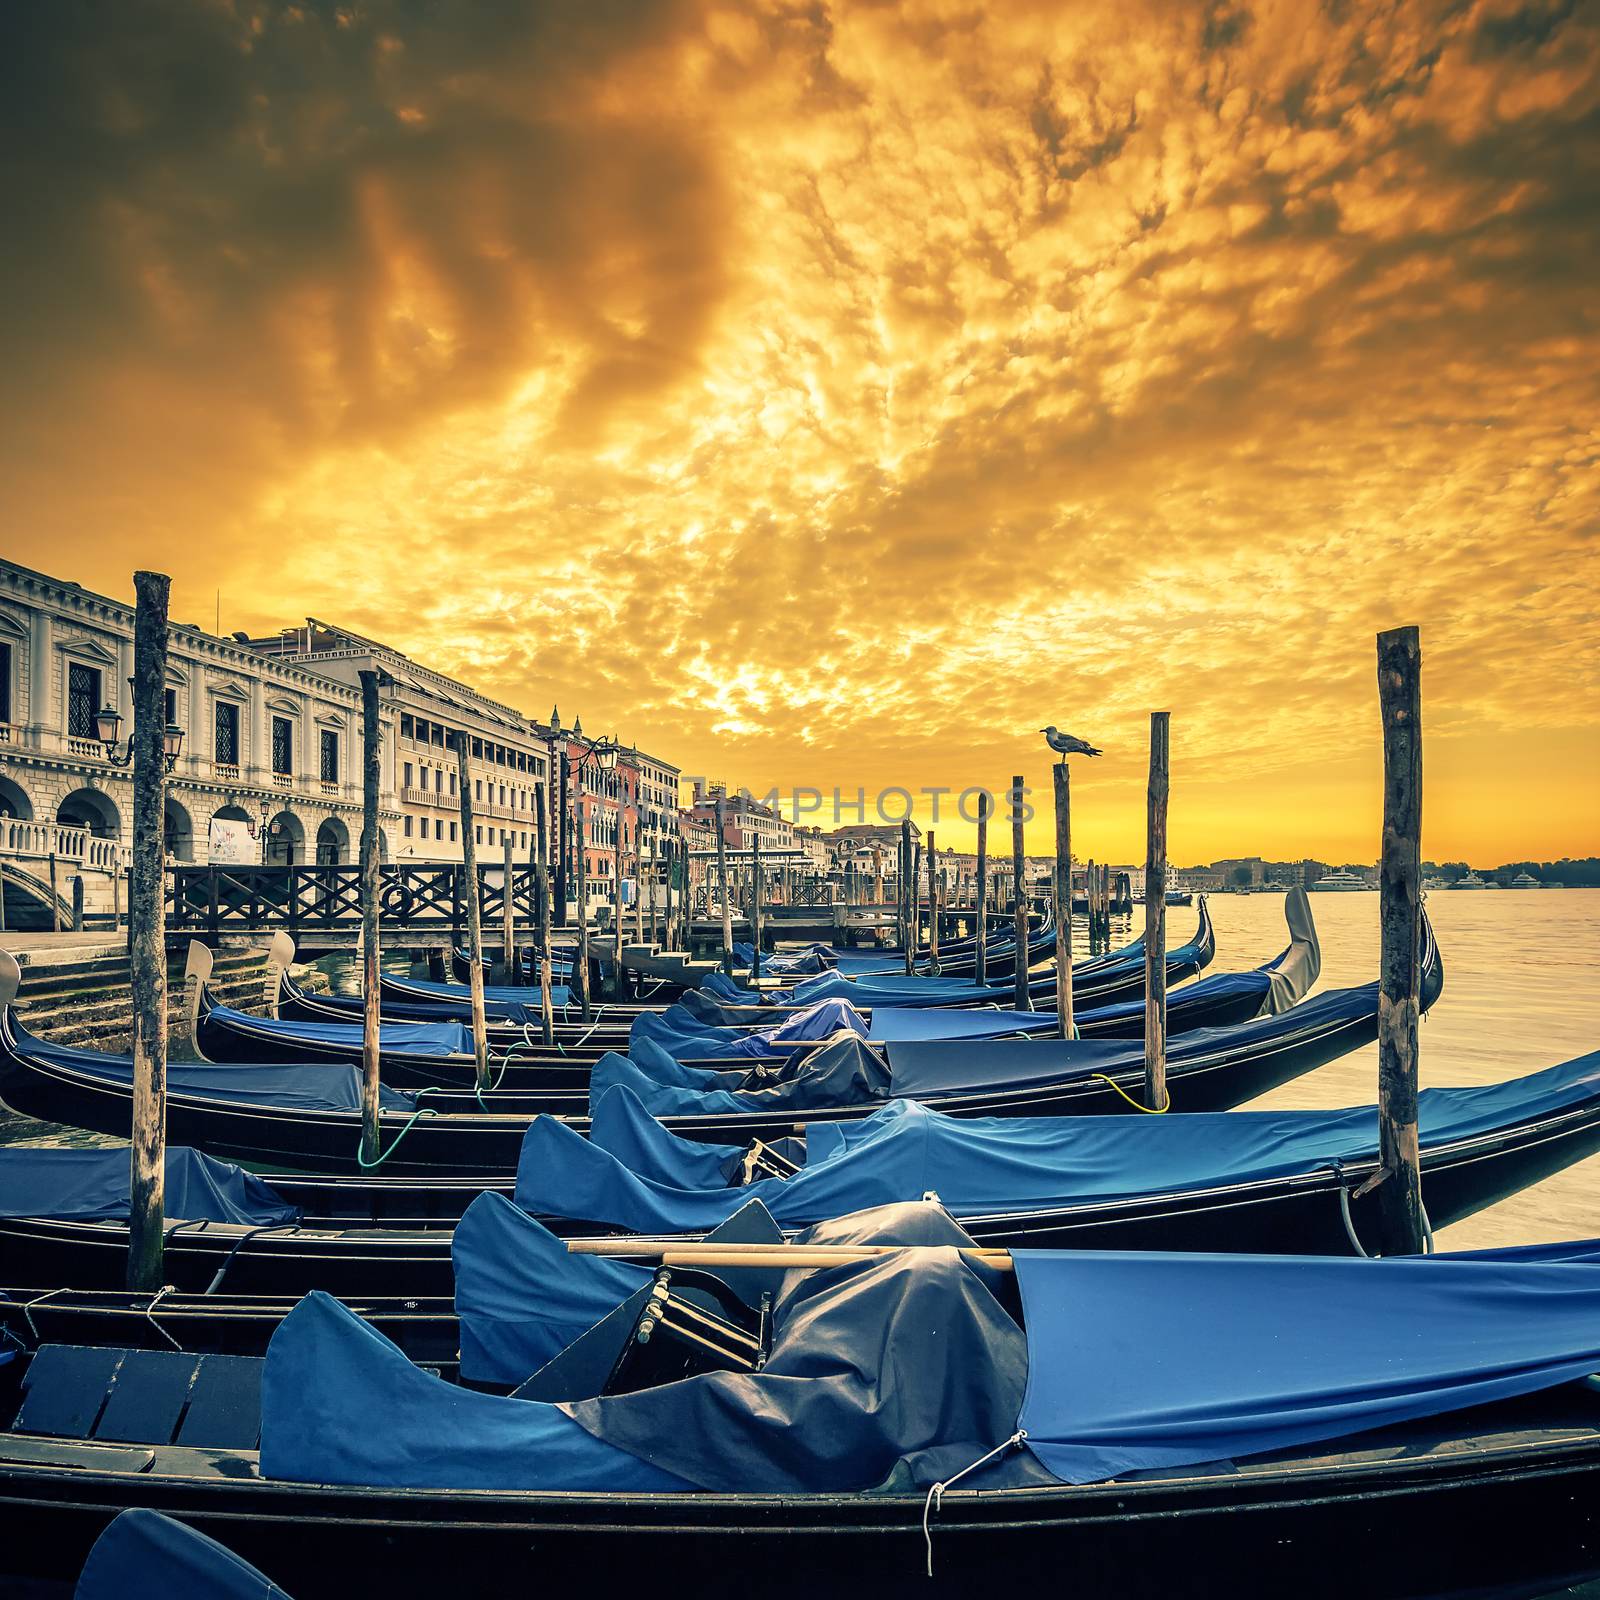 View of Venice with gondolas at sunrise, Italy